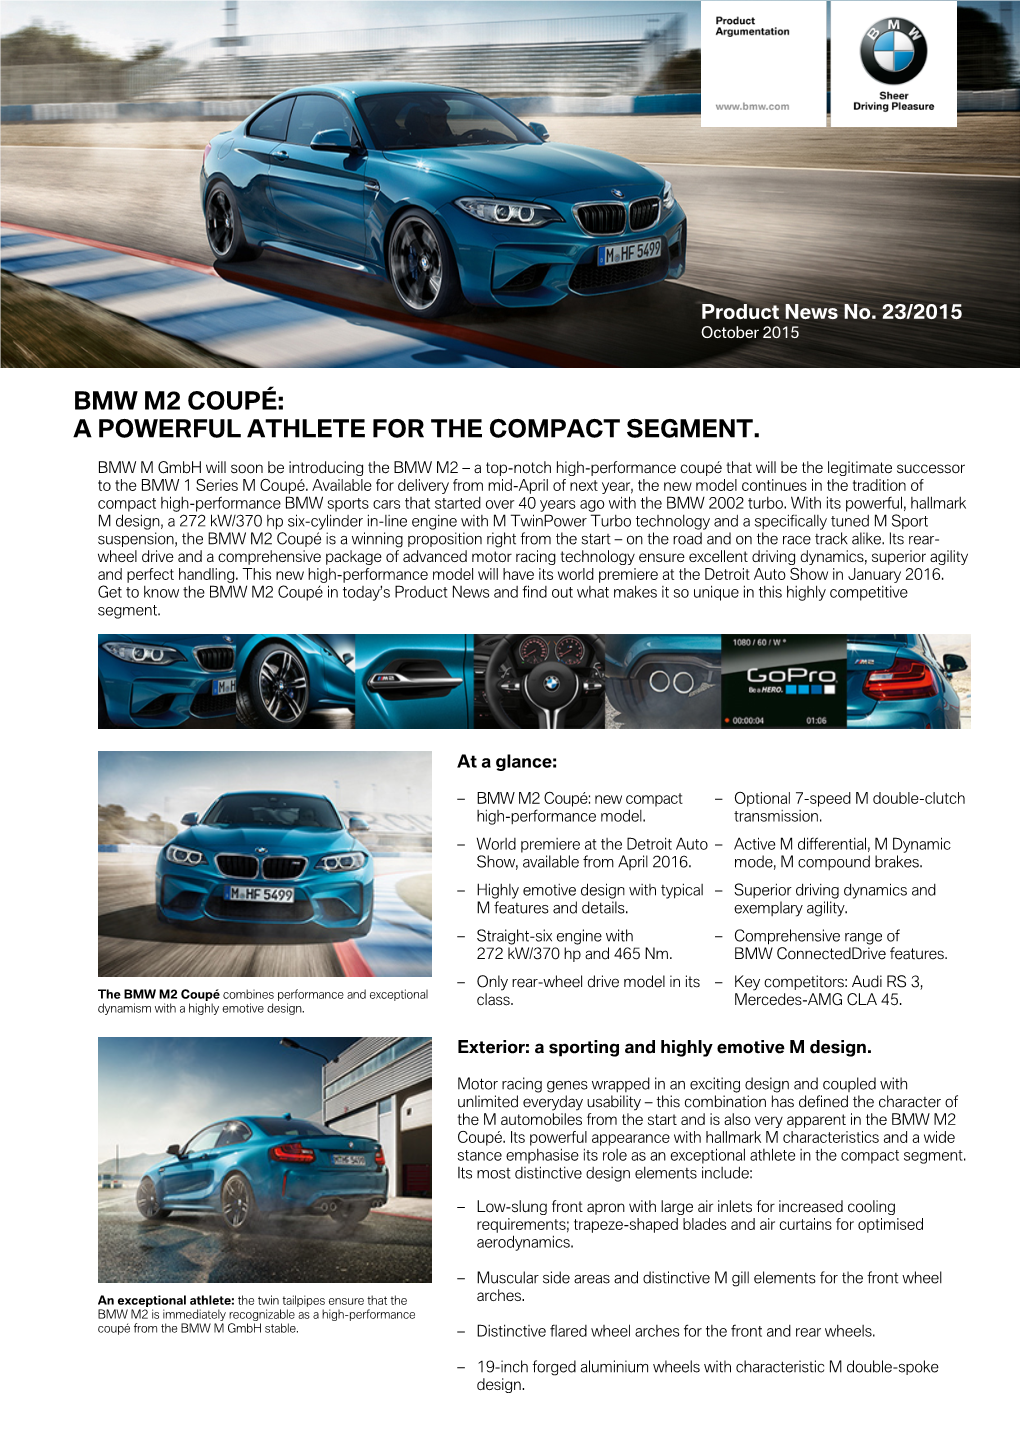 Bmw M2 Coupé: a Powerful Athlete for the Compact Segment